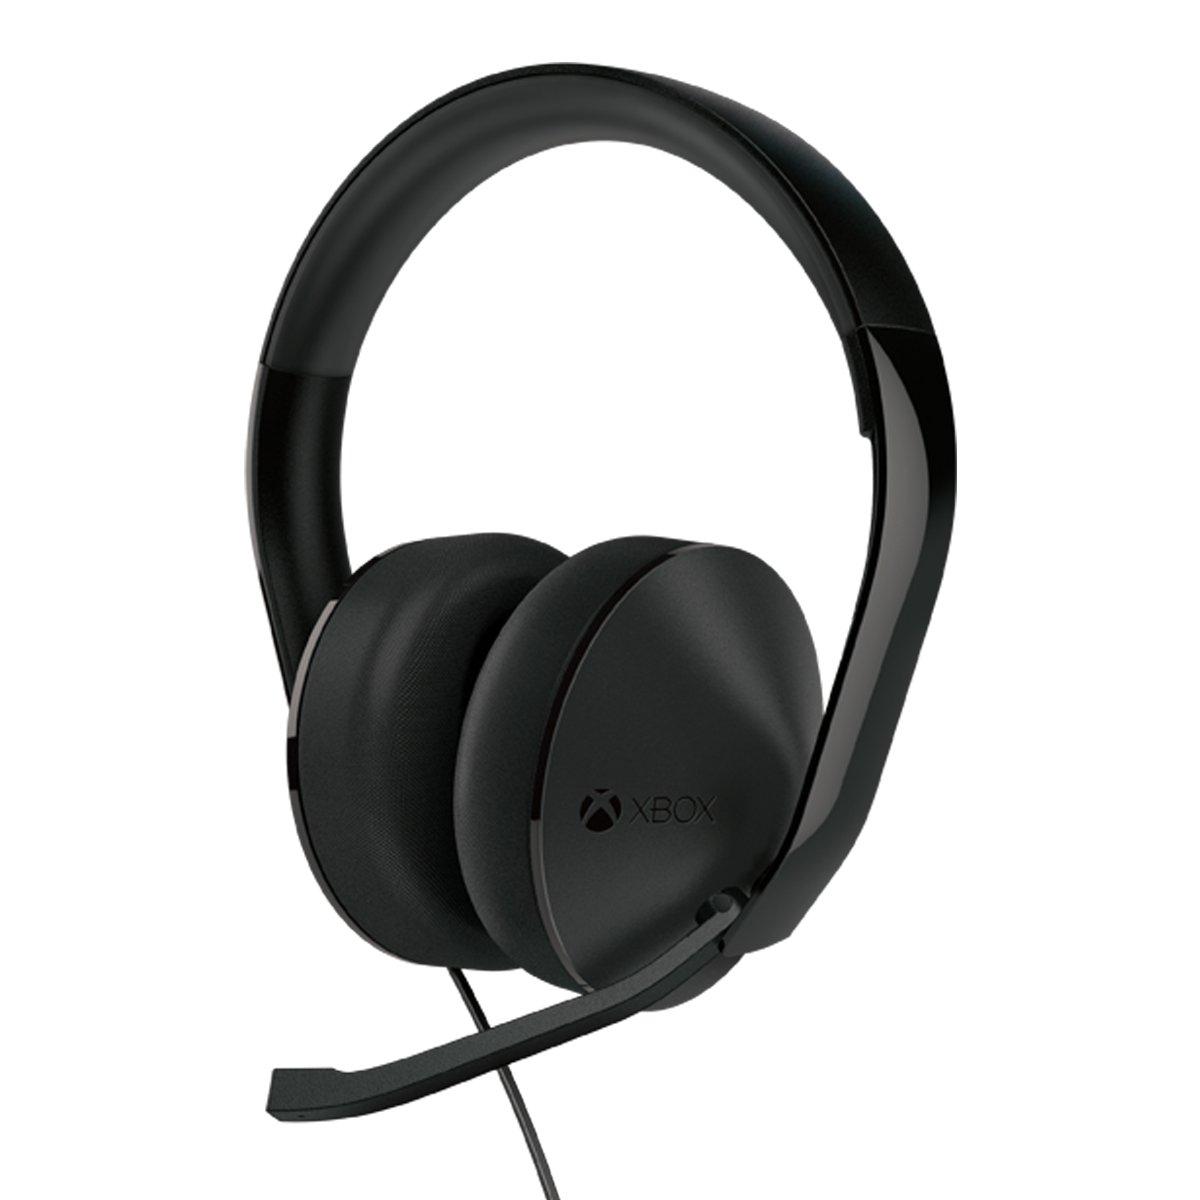 Microsoft Xbox One Wired Stereo Gaming Headset for $19.99 Shipped